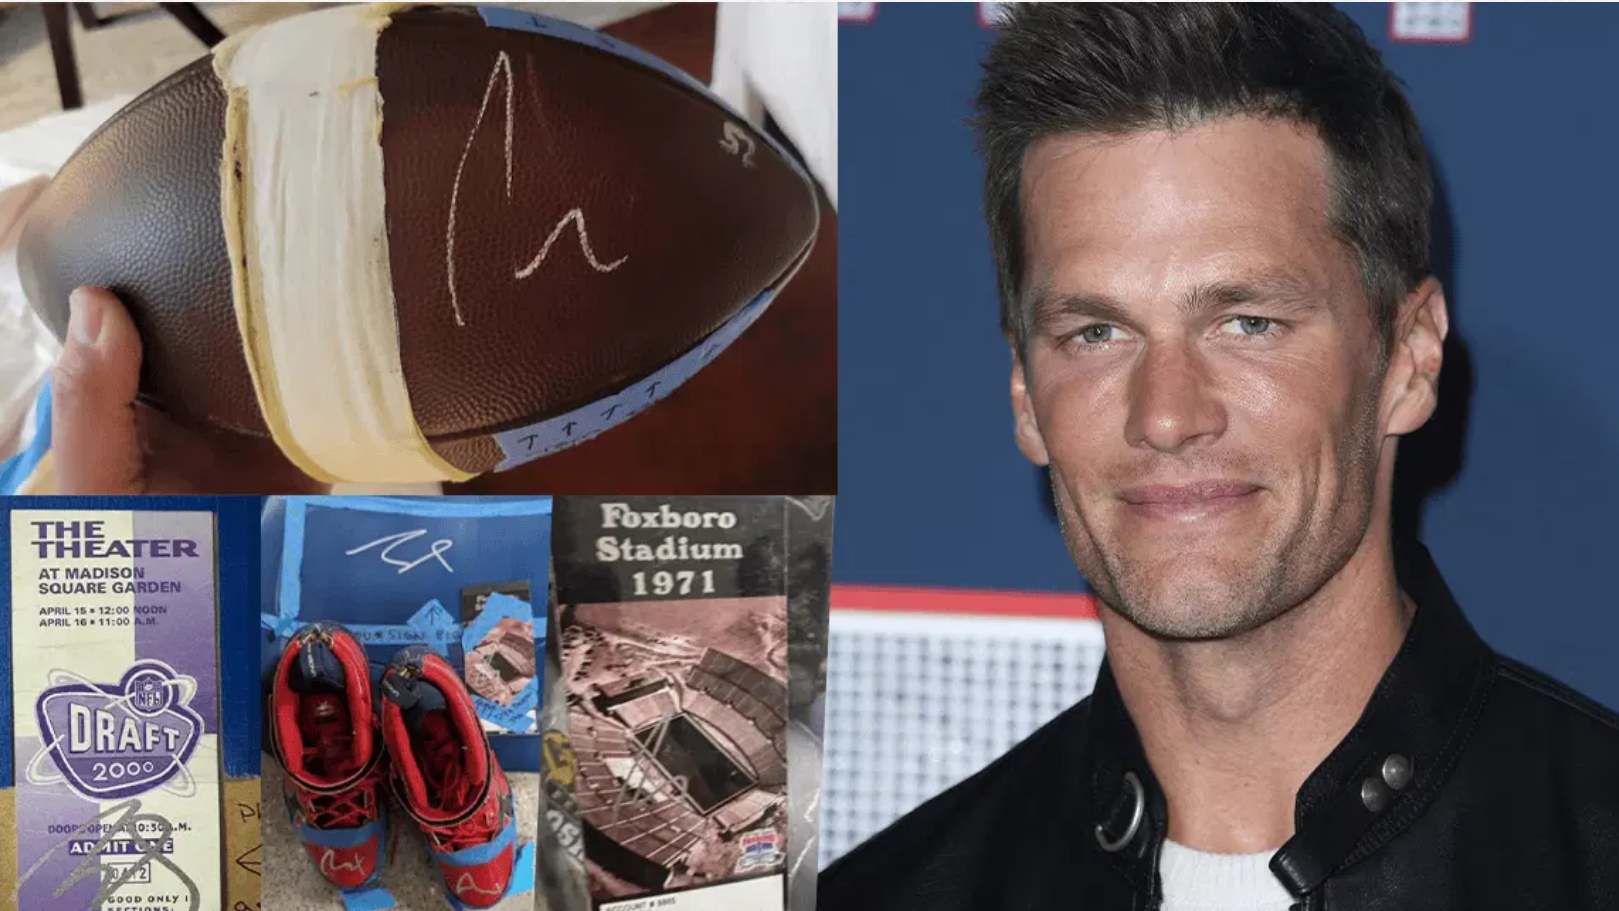 Tom Brady Autograph Event Leaves Collectors Disappointed and Disgruntled